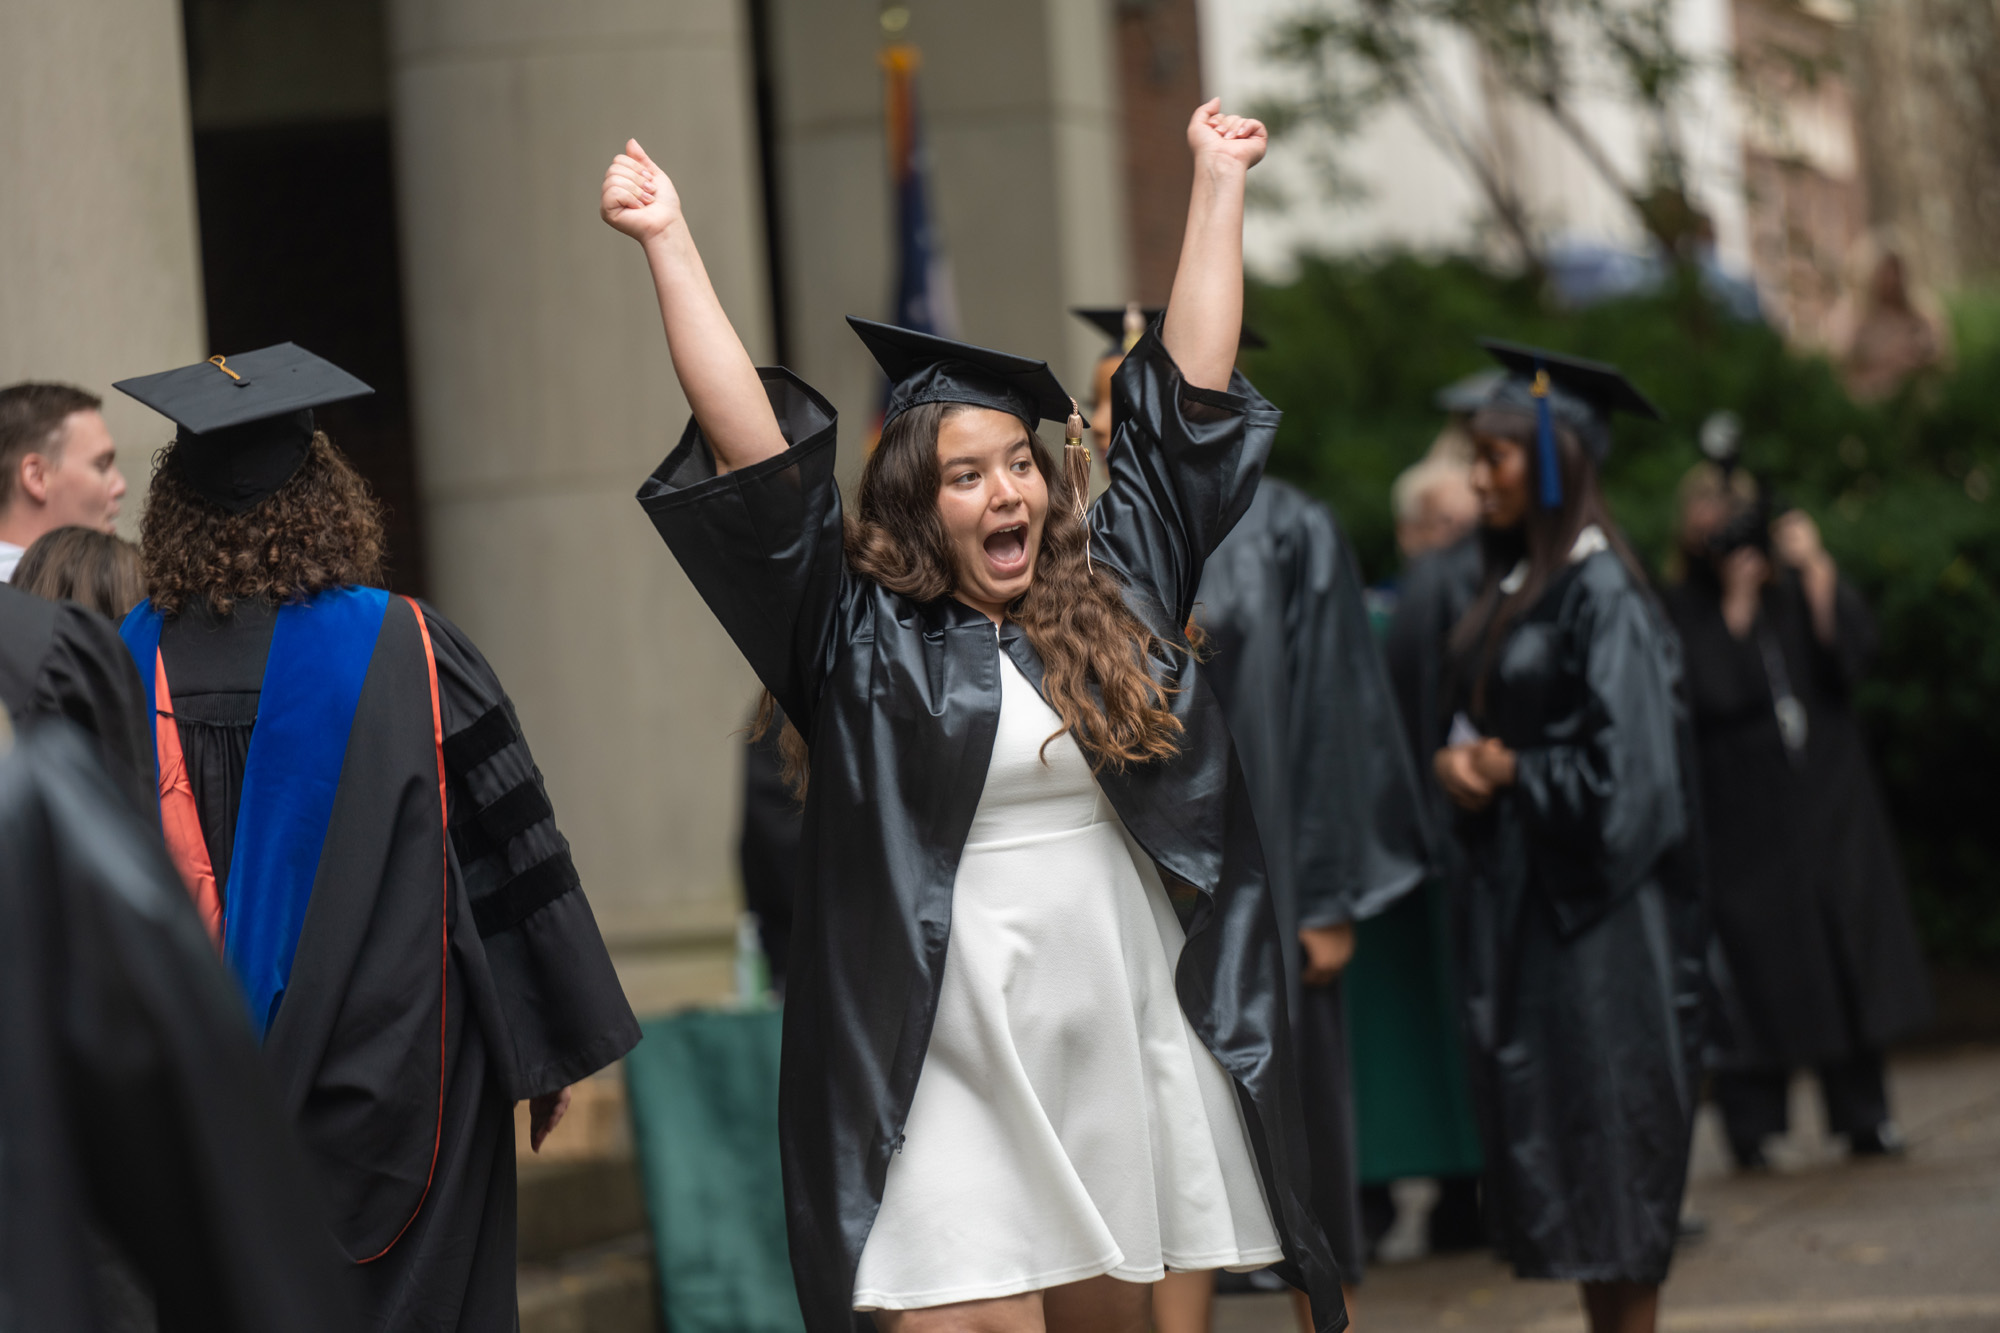 A female graduating student jumps for joy with arms spread